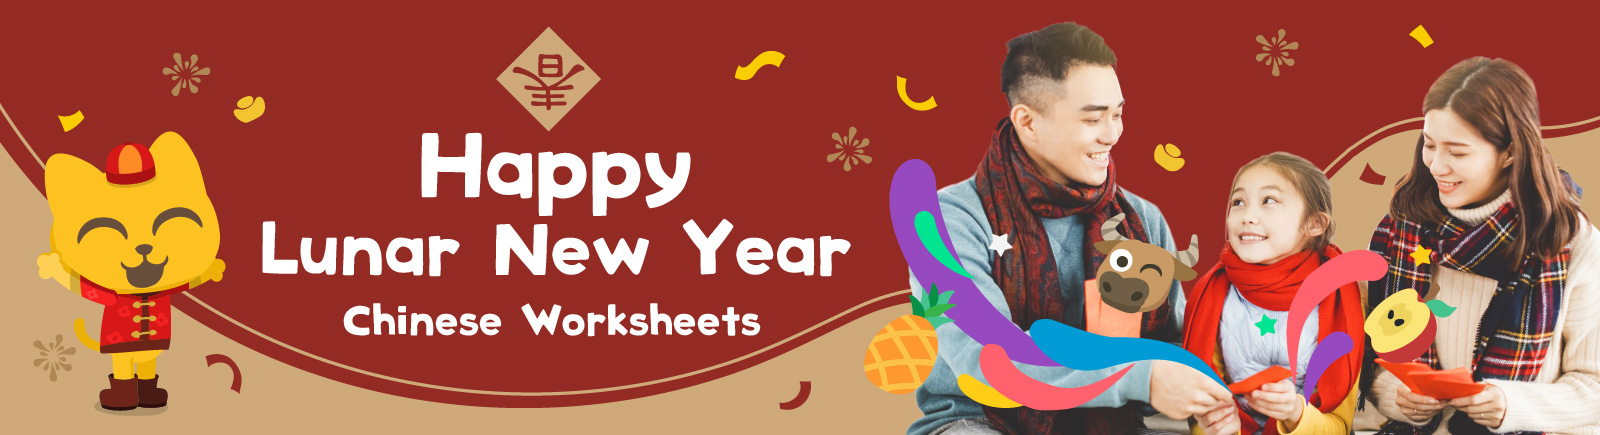 Happy Lunar New Year - Chinese Worksheets